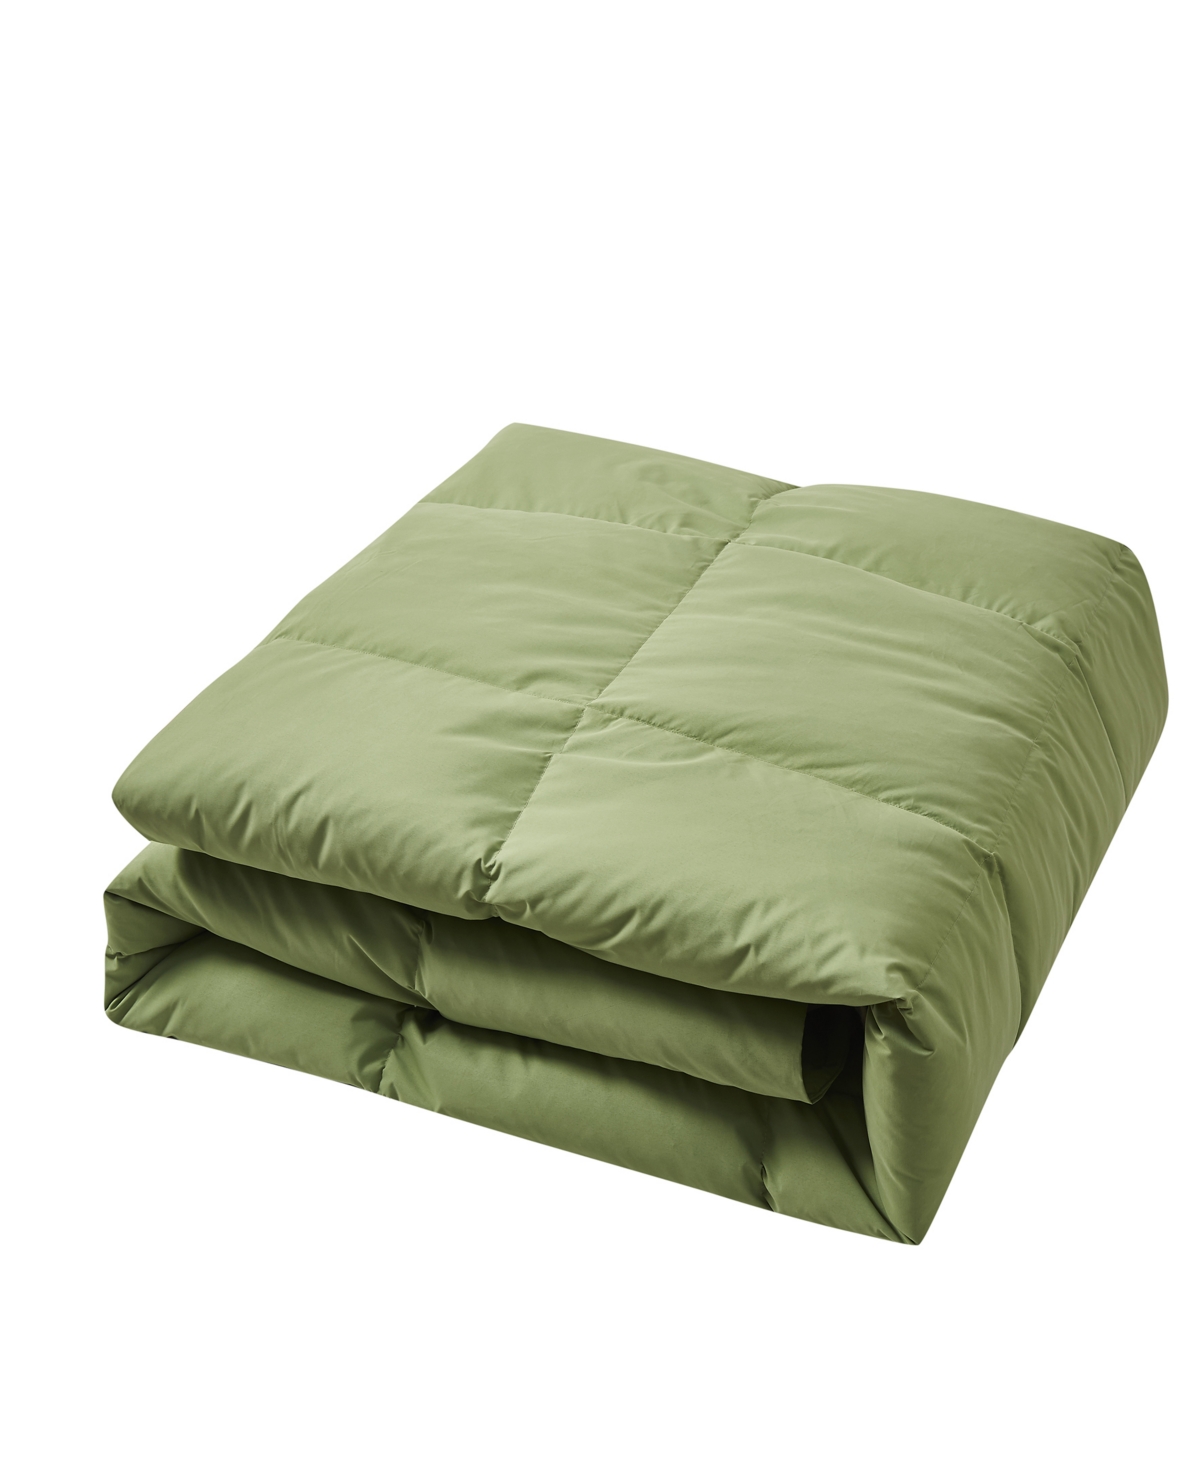 Beautyrest Microfiber Colored Feather & Down Comforter, Twin In Sage